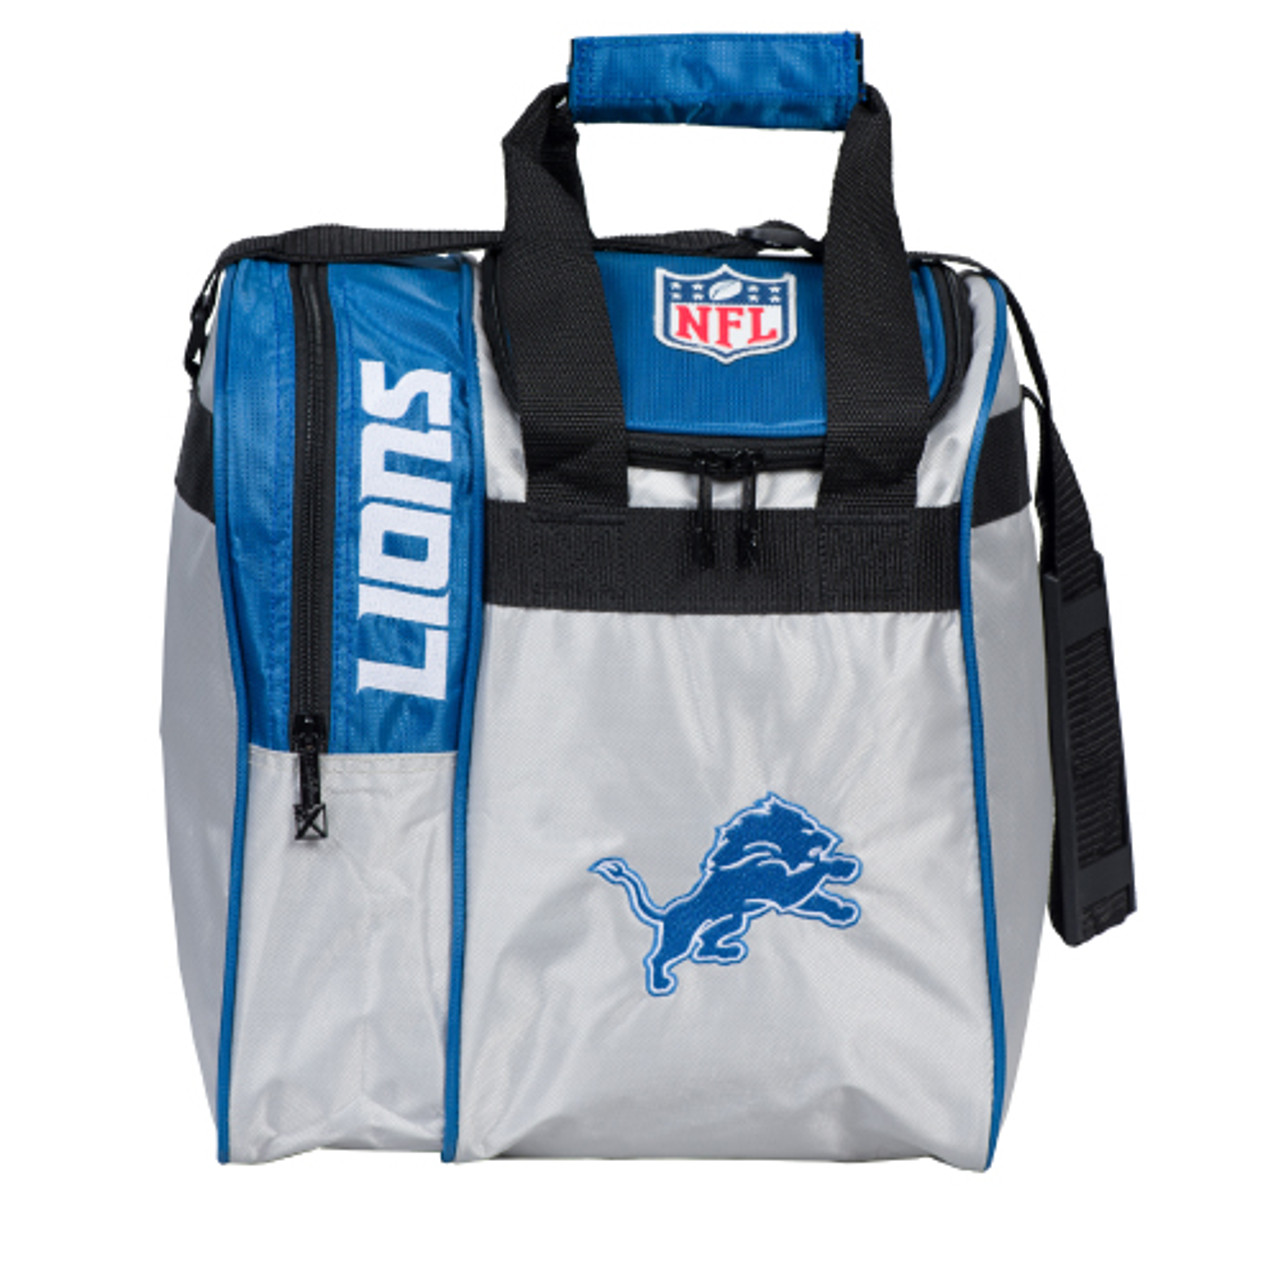 Indianapolis Colts Single Bowling Ball Tote Bag with Shoe Compartment